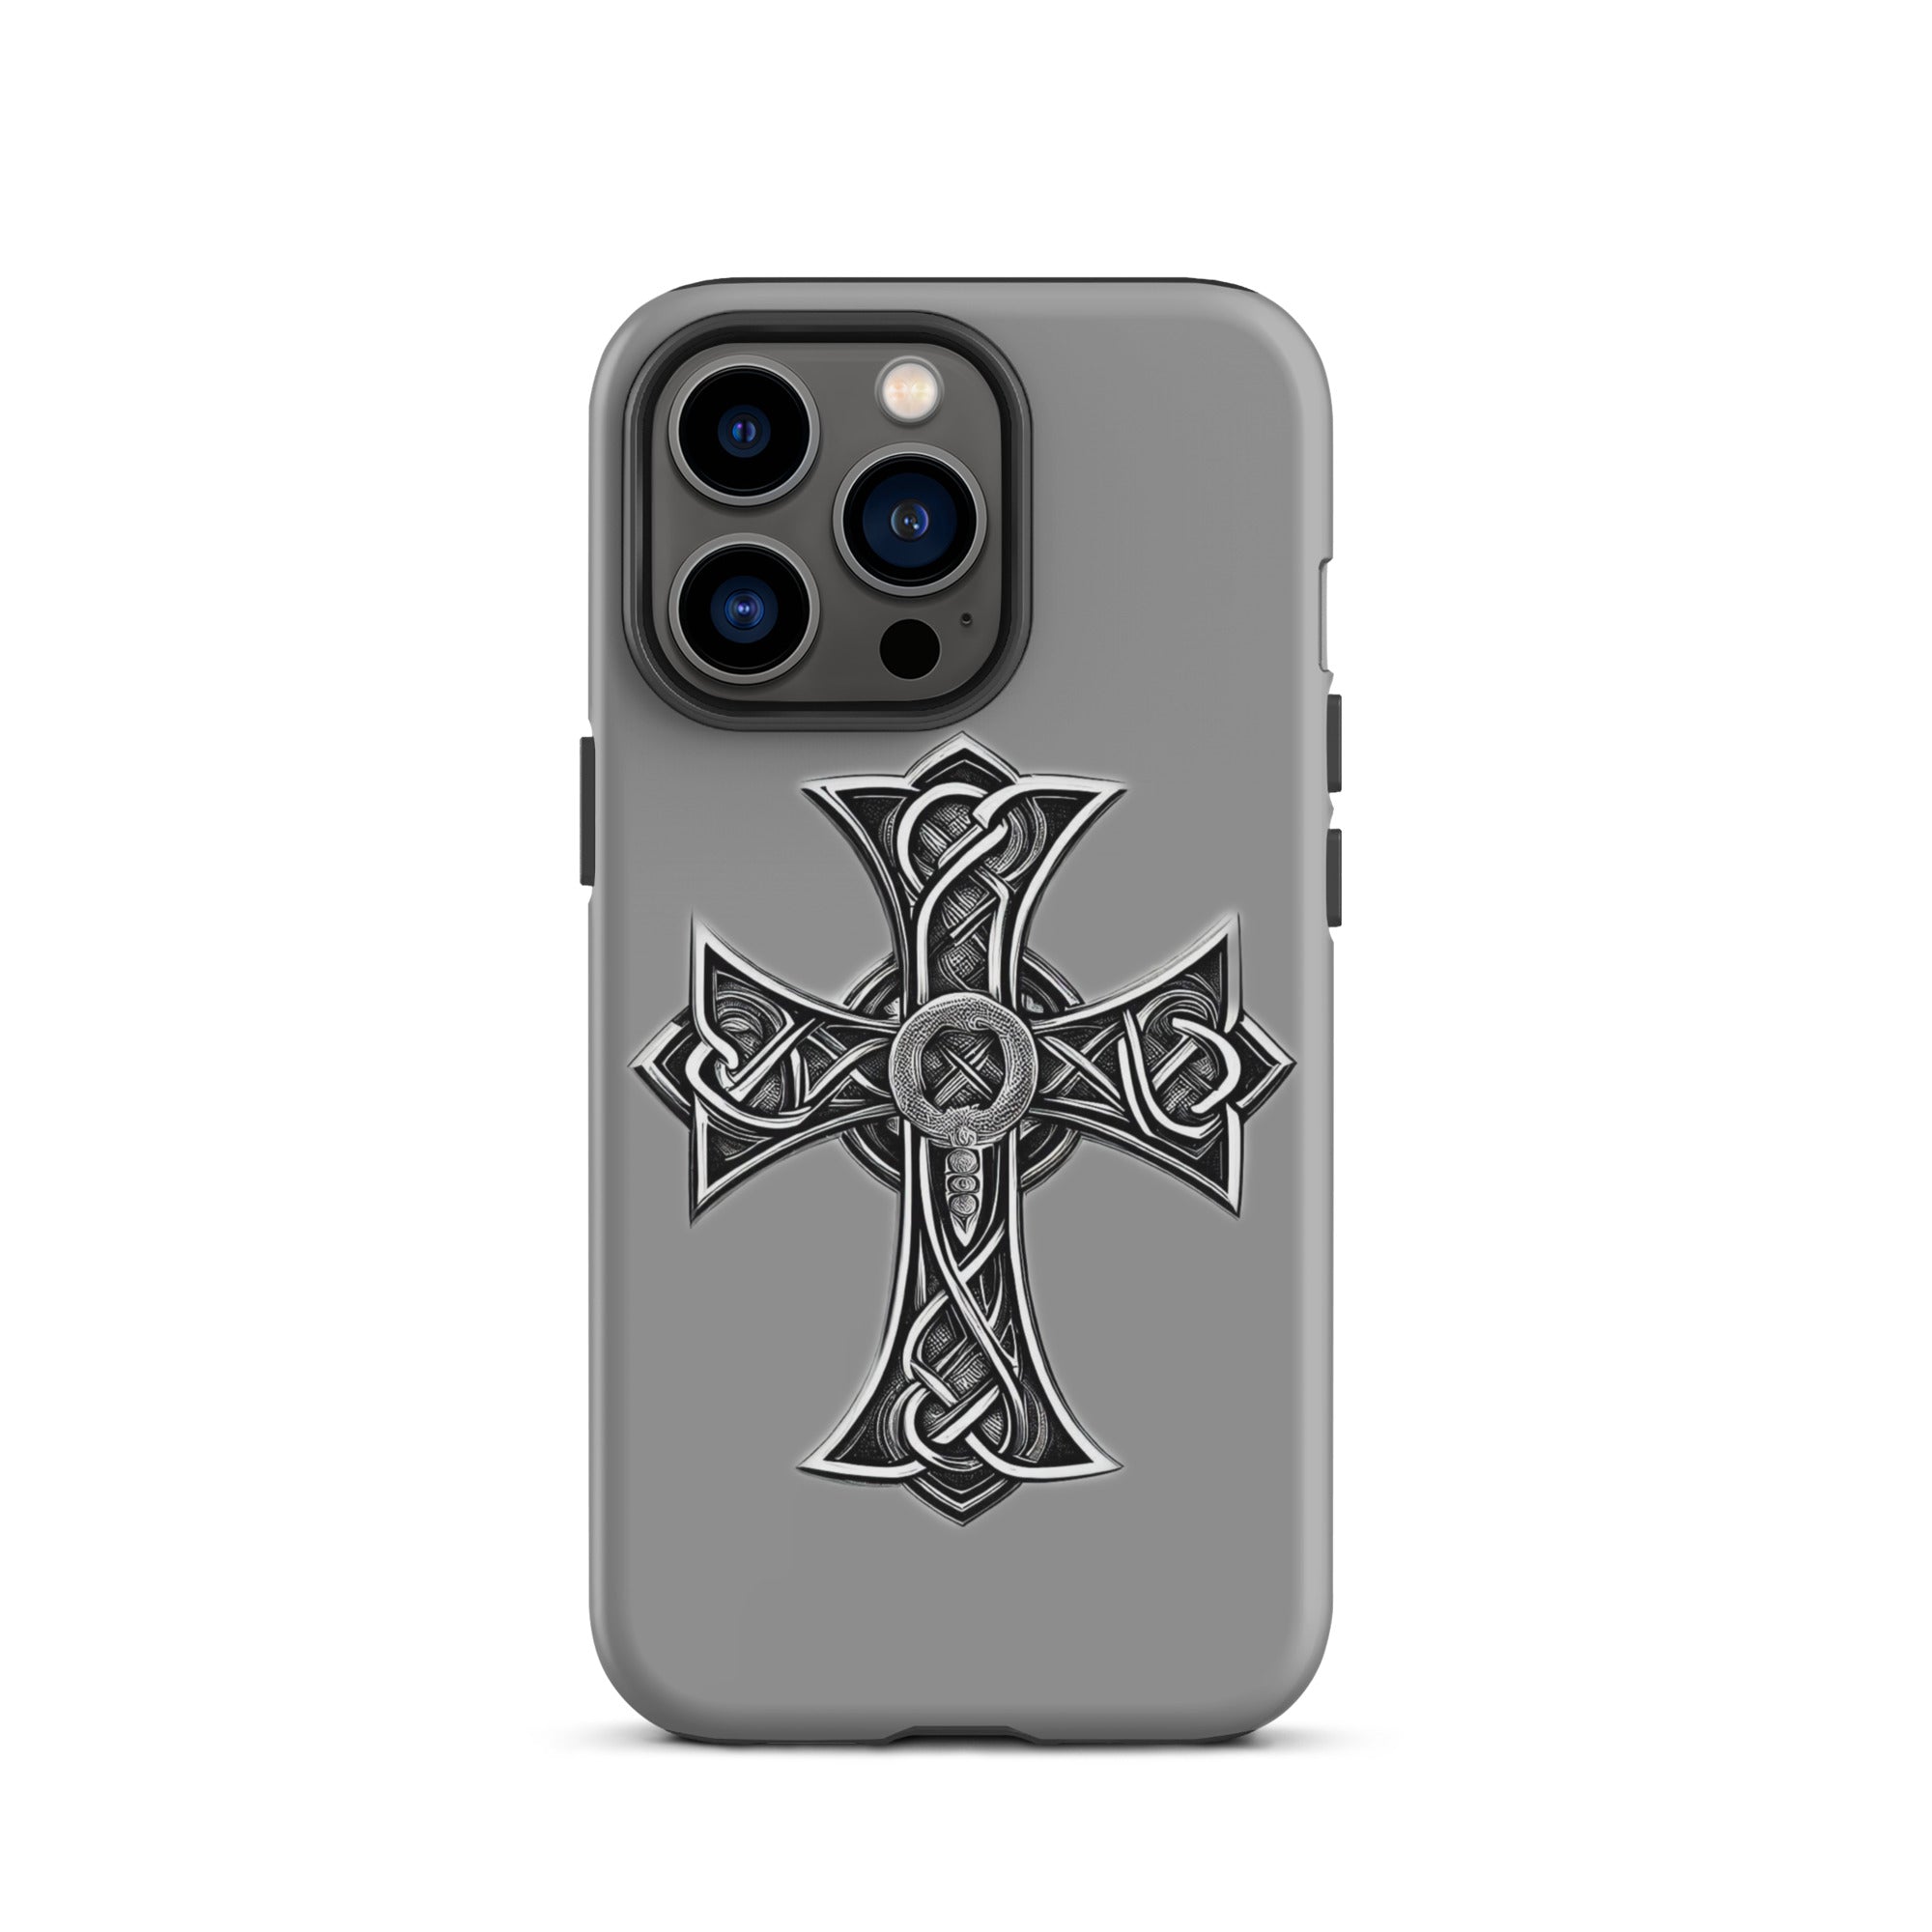 tough-case-for-iphone-matte-iphone-13-pro-front-6563847714211.jpg